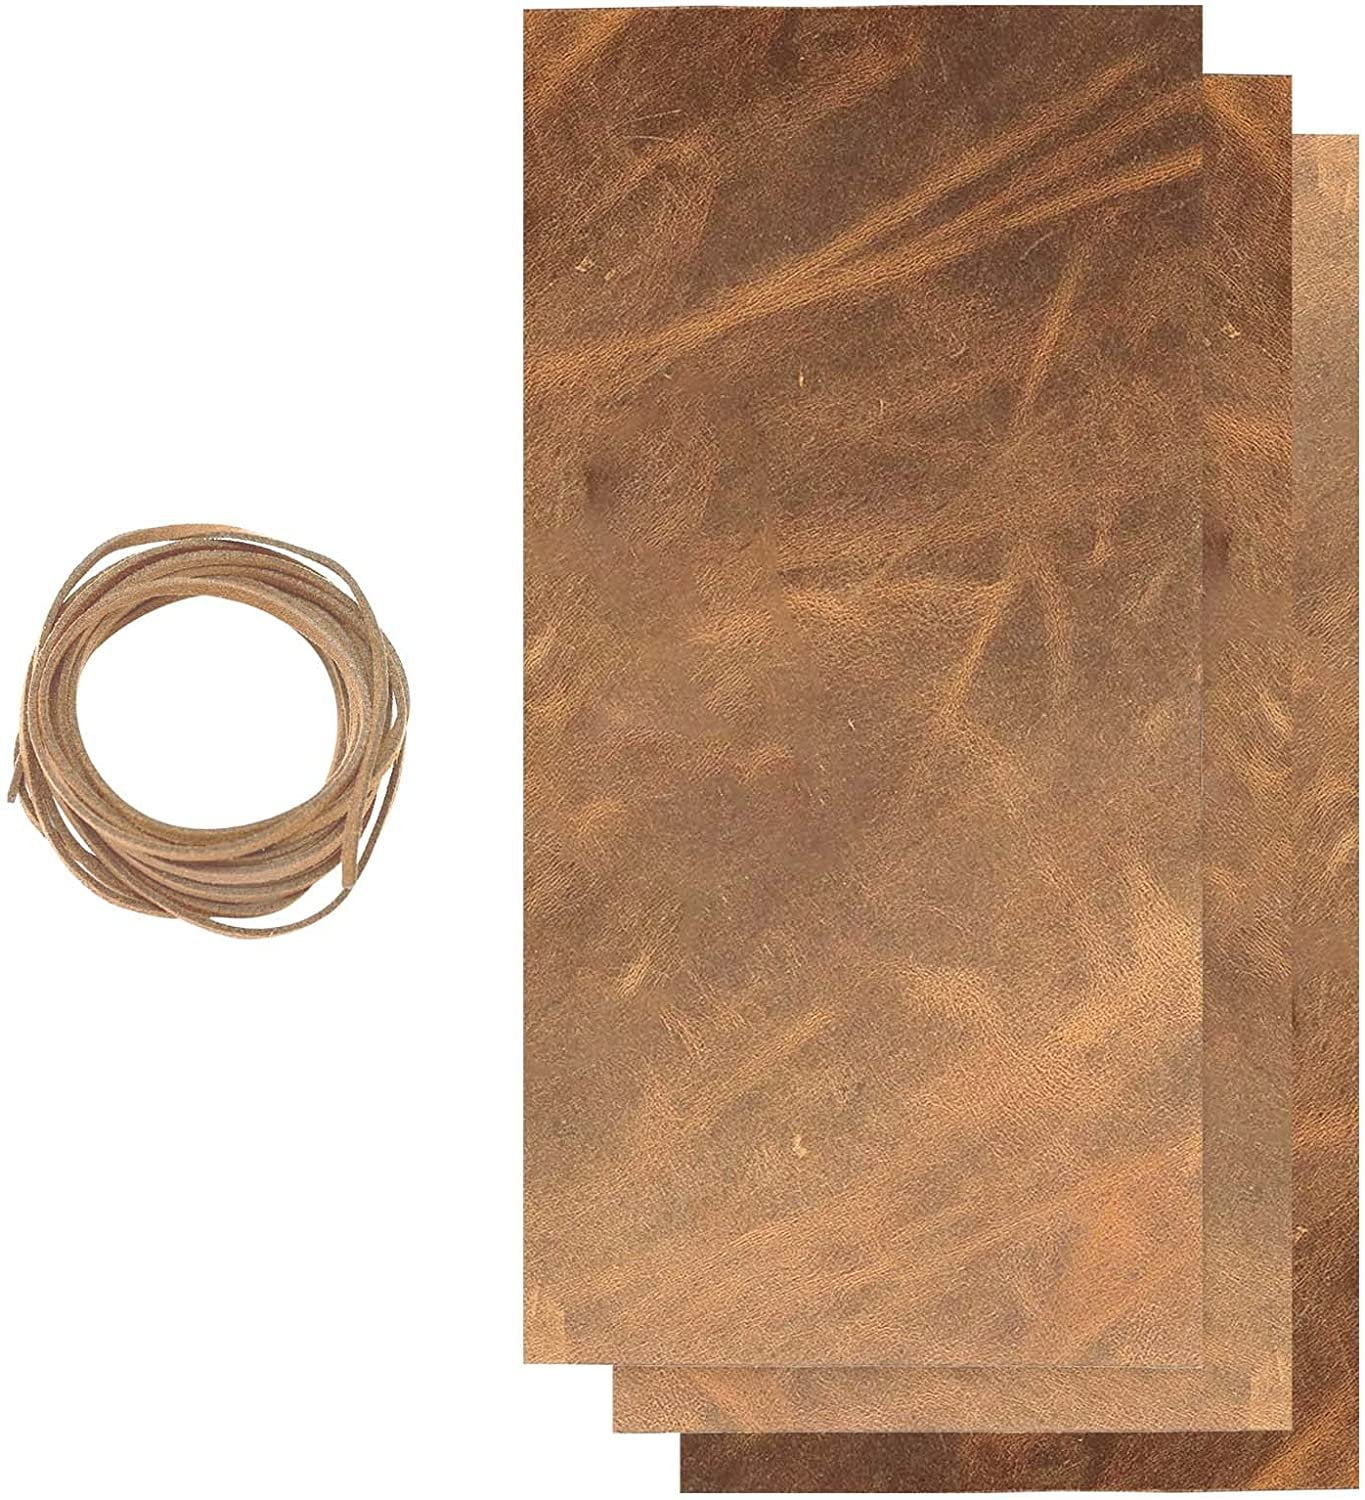 Light BROWN leather sheet 6x6/8x10/12x12 inch genuine leather pieces RUBBER  548